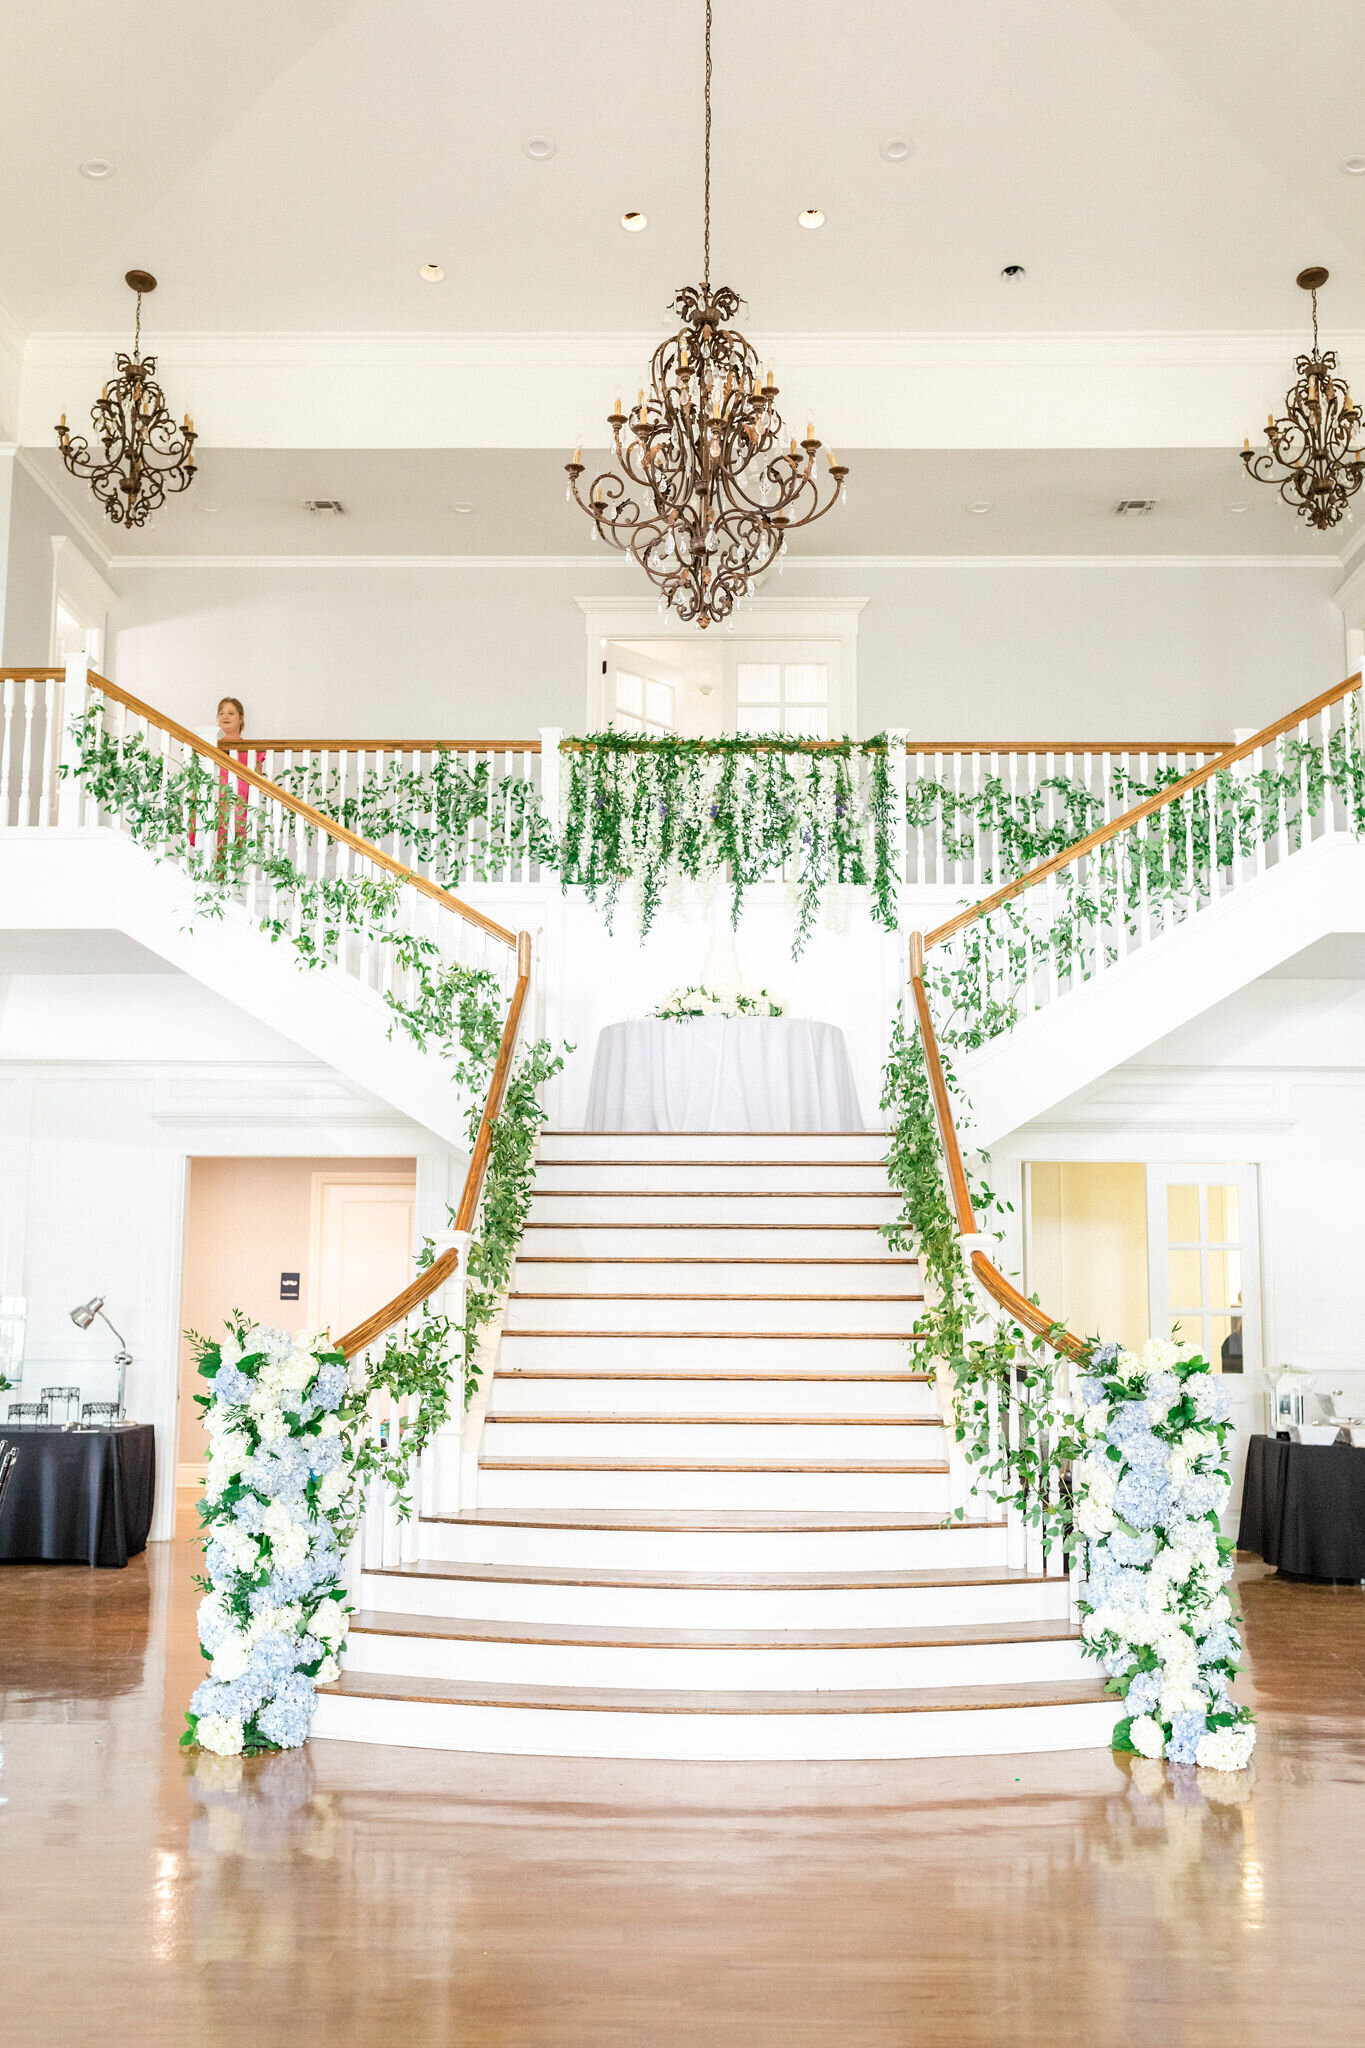 The Kendall Point grand staircase decorated with flowers.